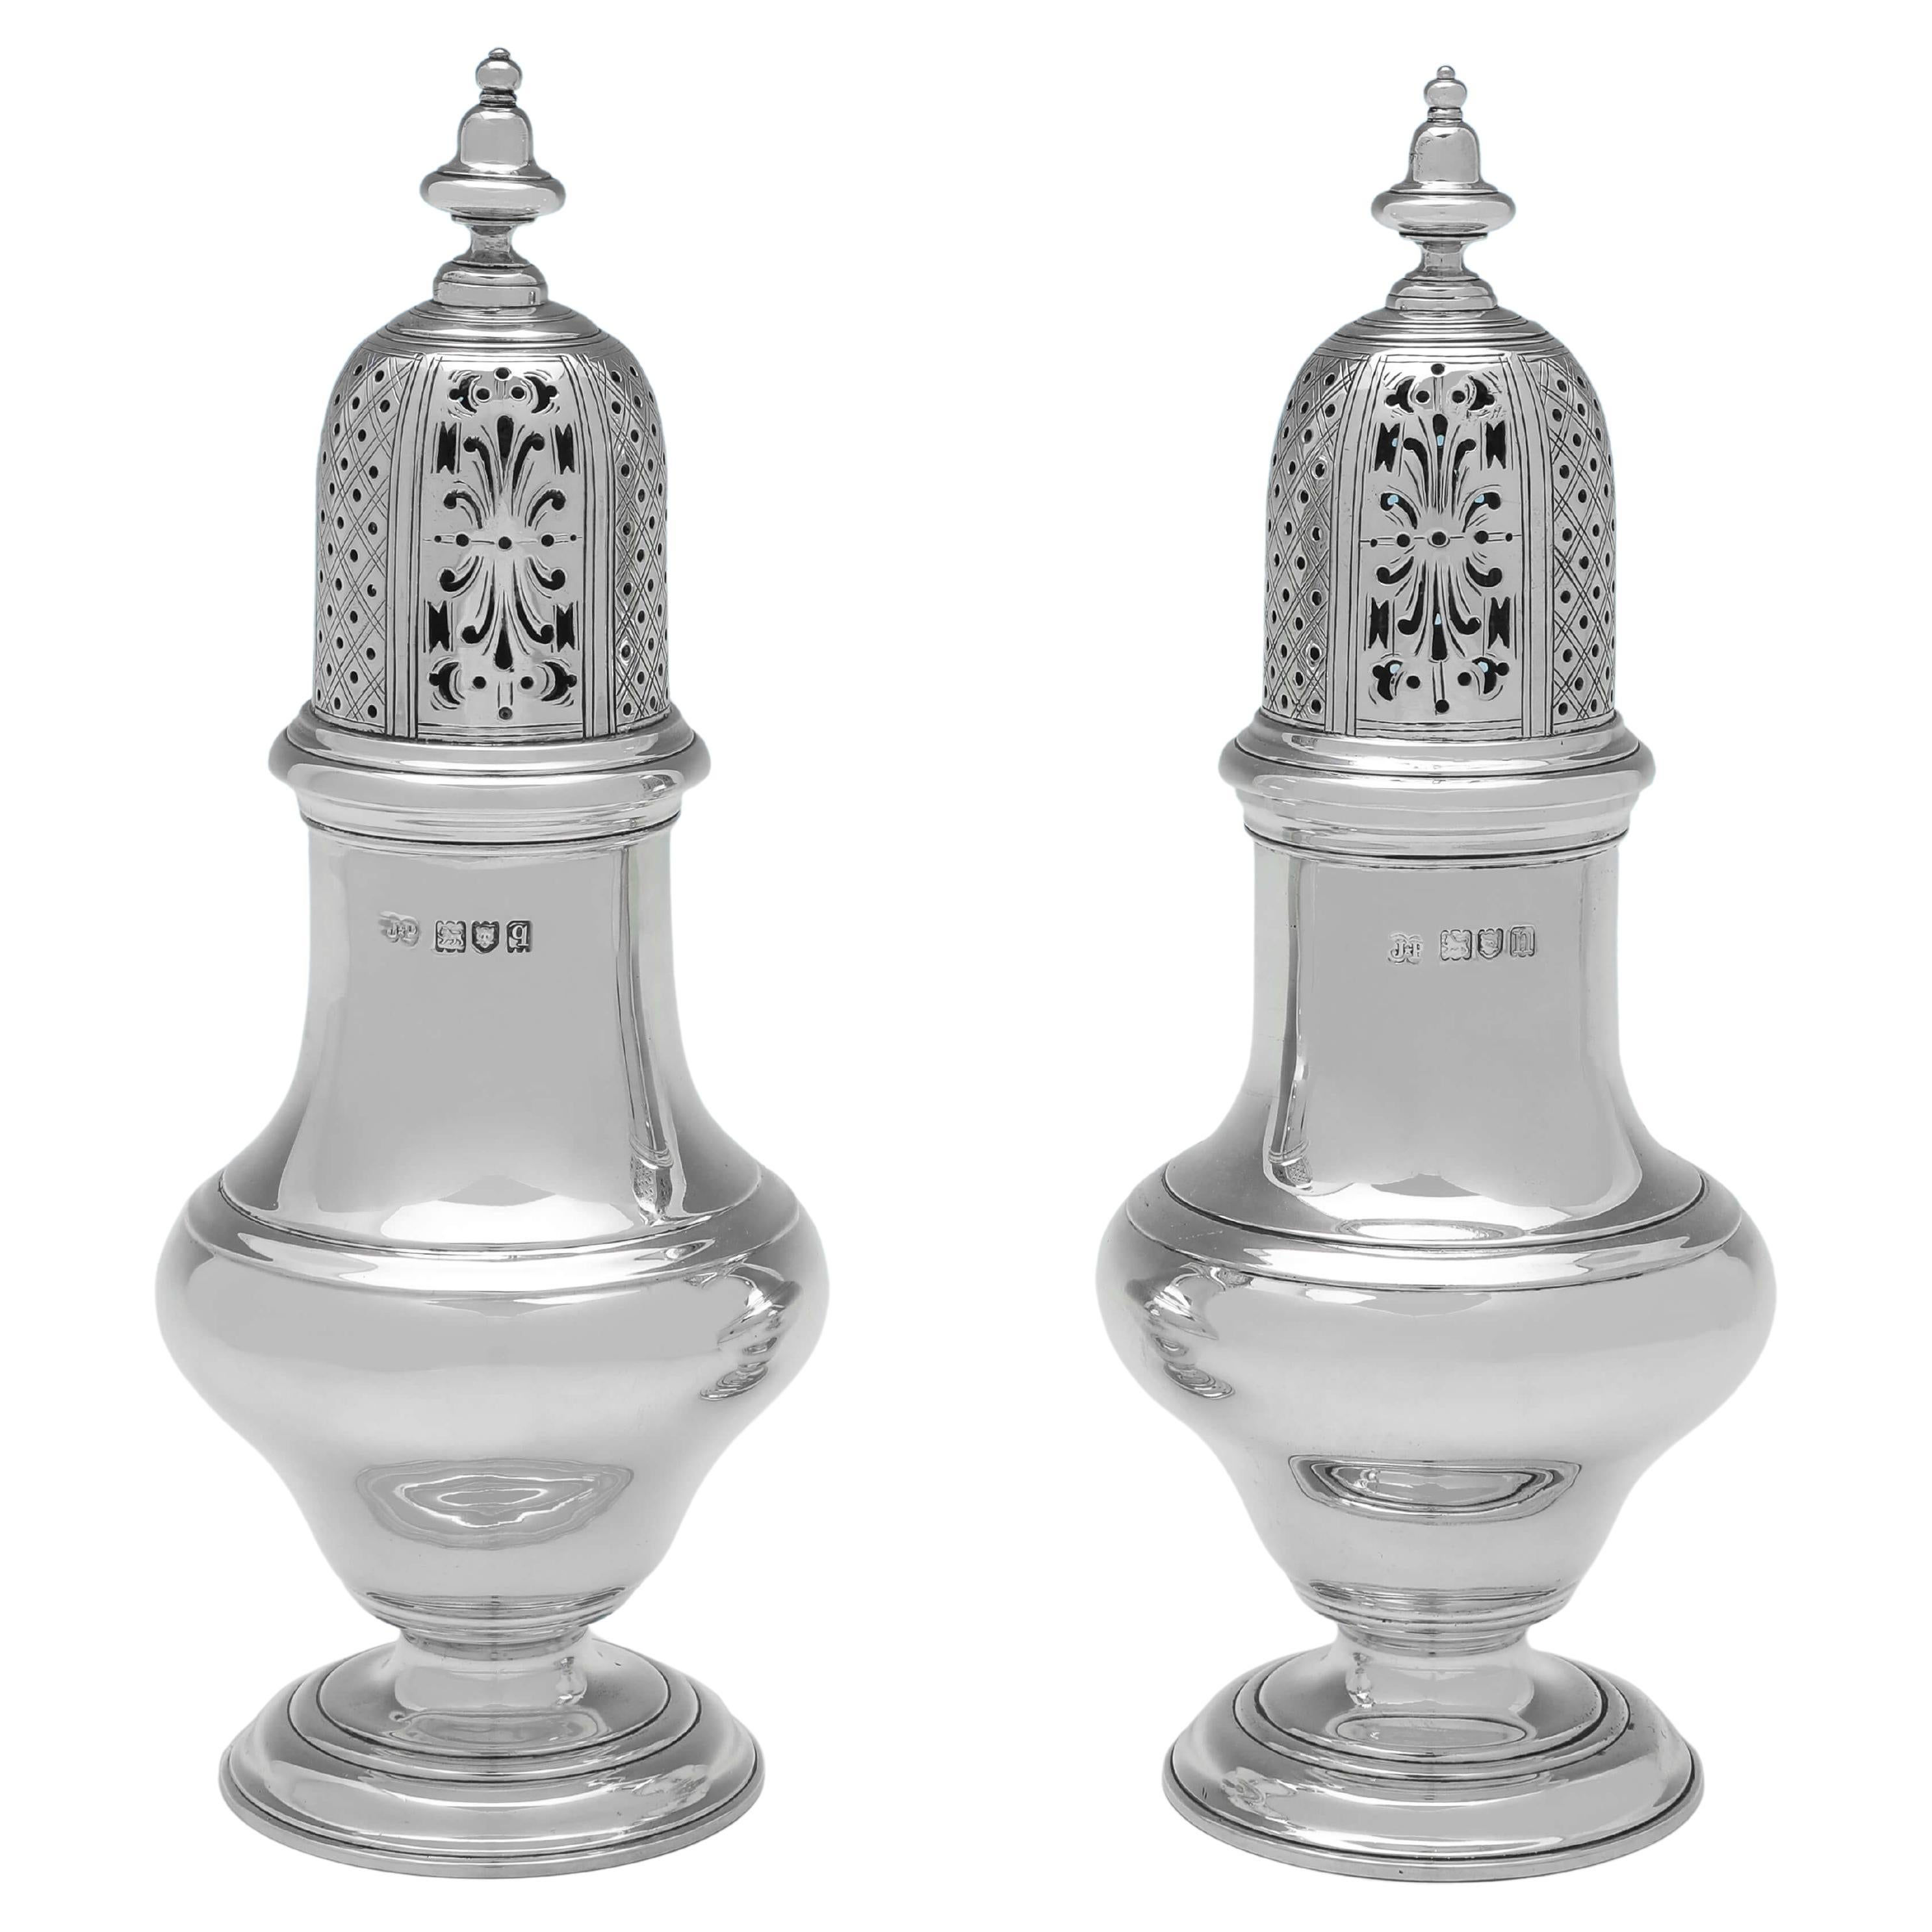 Pair of Antique Sterling Silver Sugar Casters, 1908 & 1911 by J. Parkes & Co.